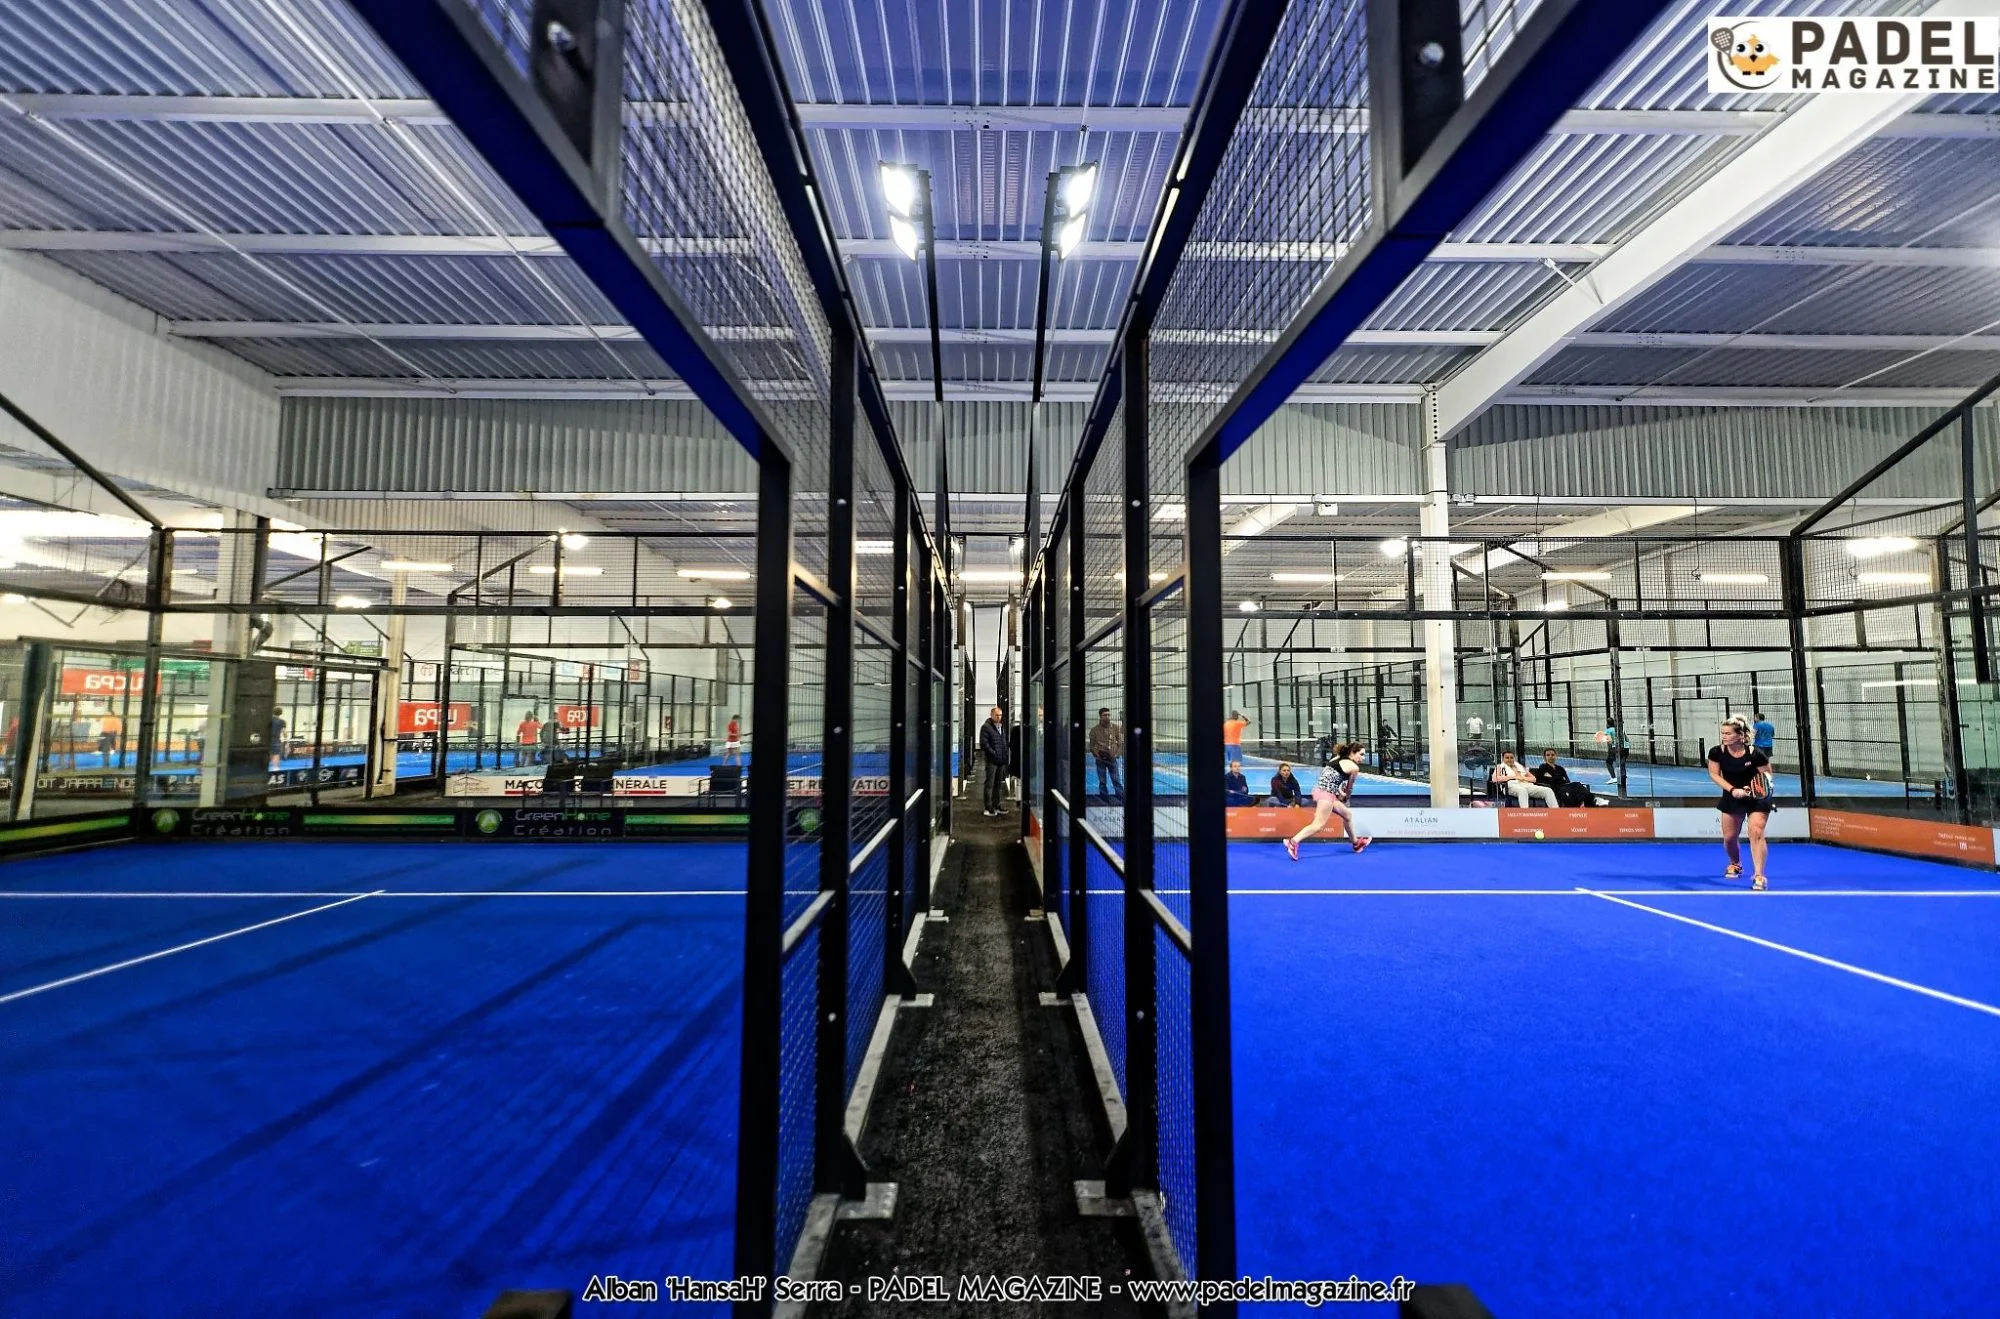 my padel toulouse tower padel 2018 club